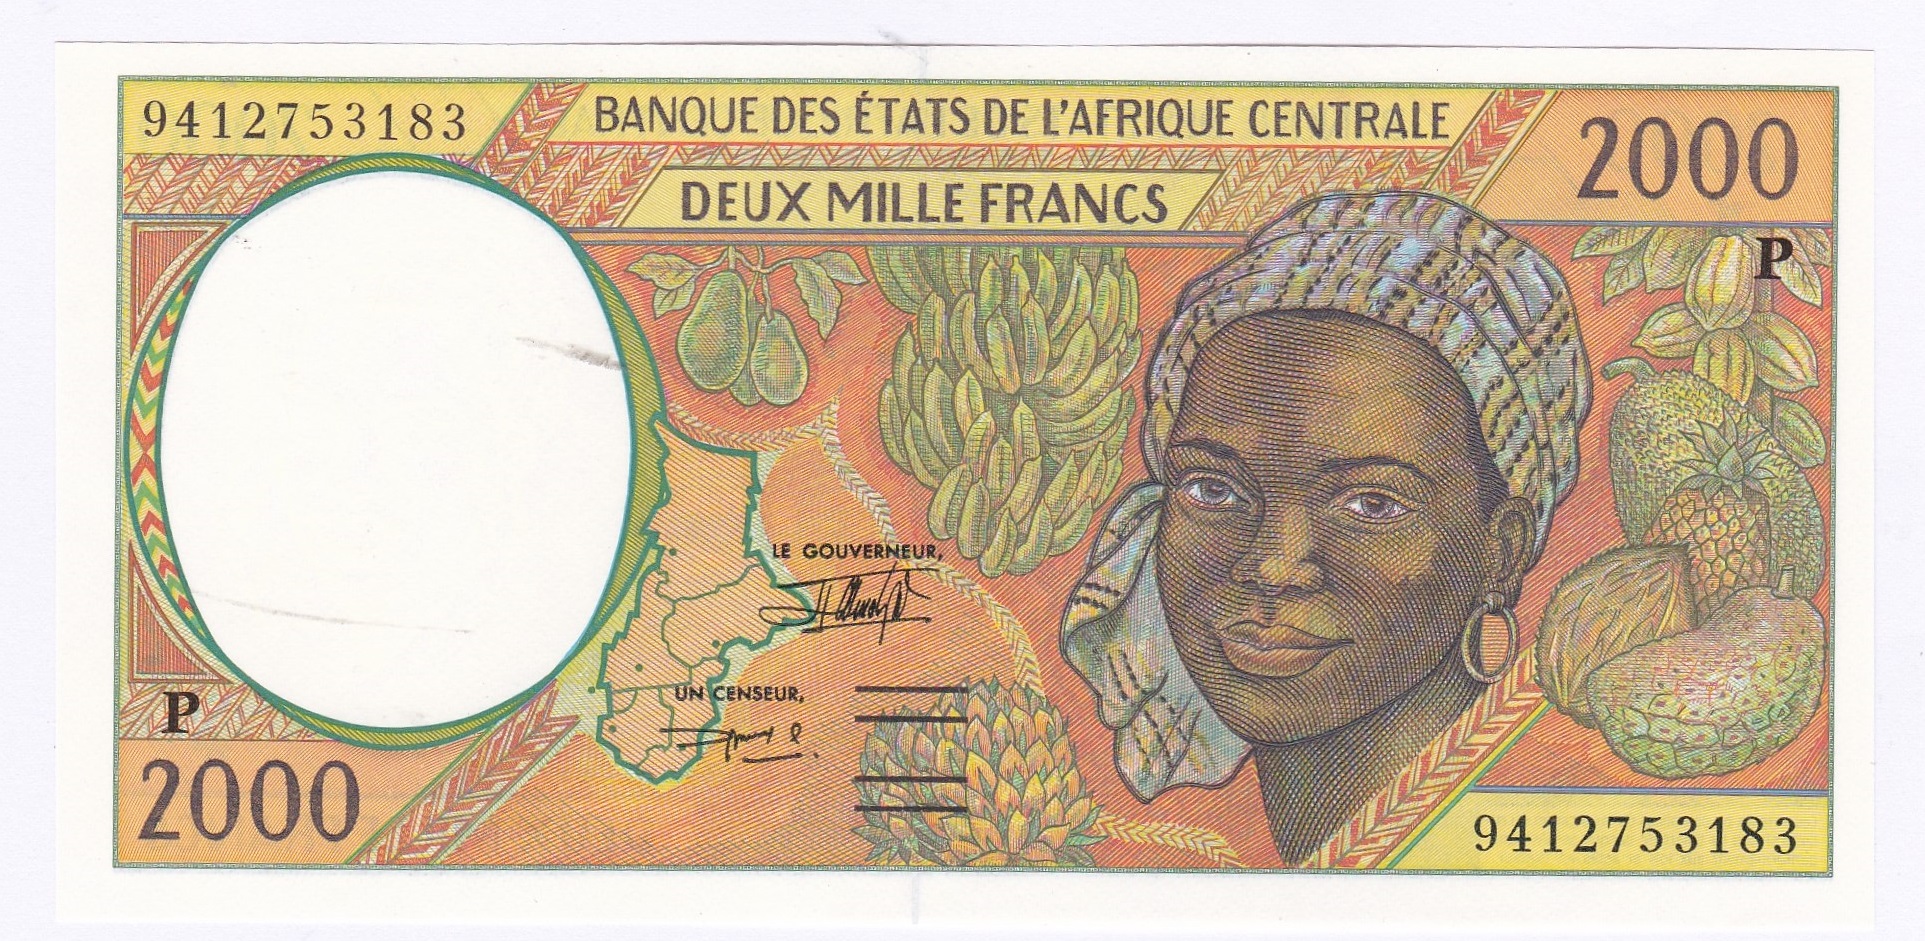 Central African State (Chad) - 1994 2000 Francs Ref P3b, AUNC - Image 2 of 2